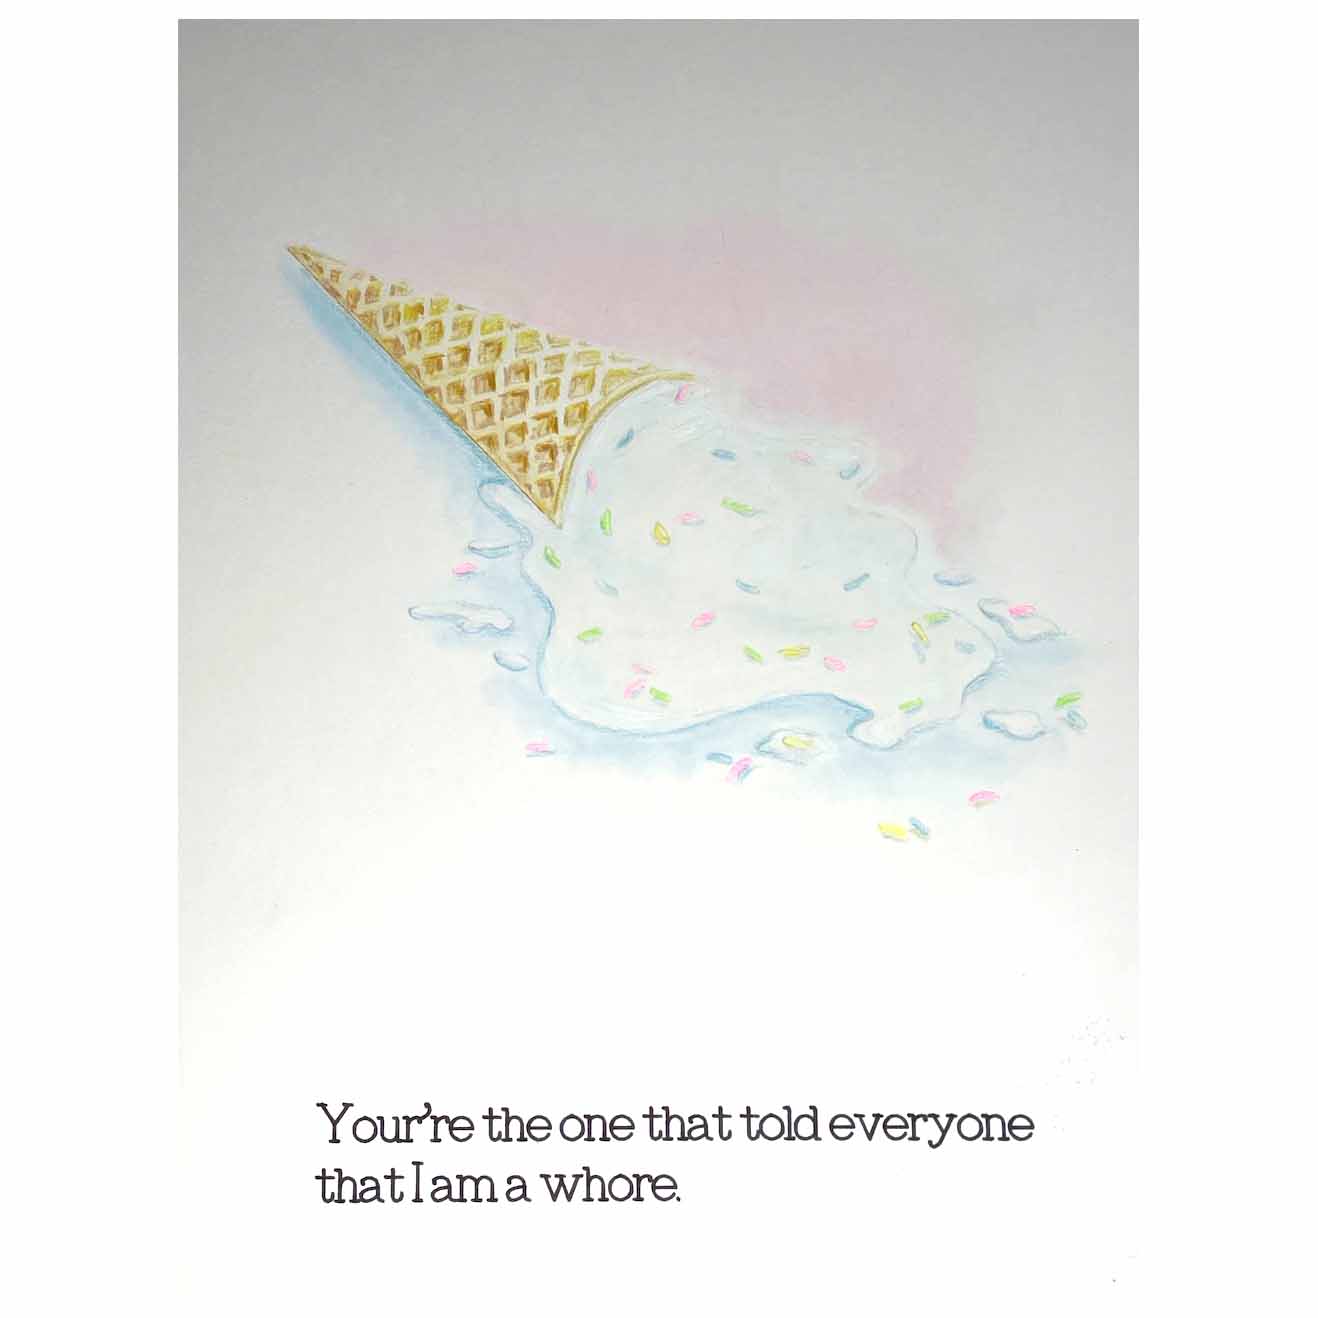 drawing of melting ice cream cone reading: "You're the one that told everyone that I am a whore."